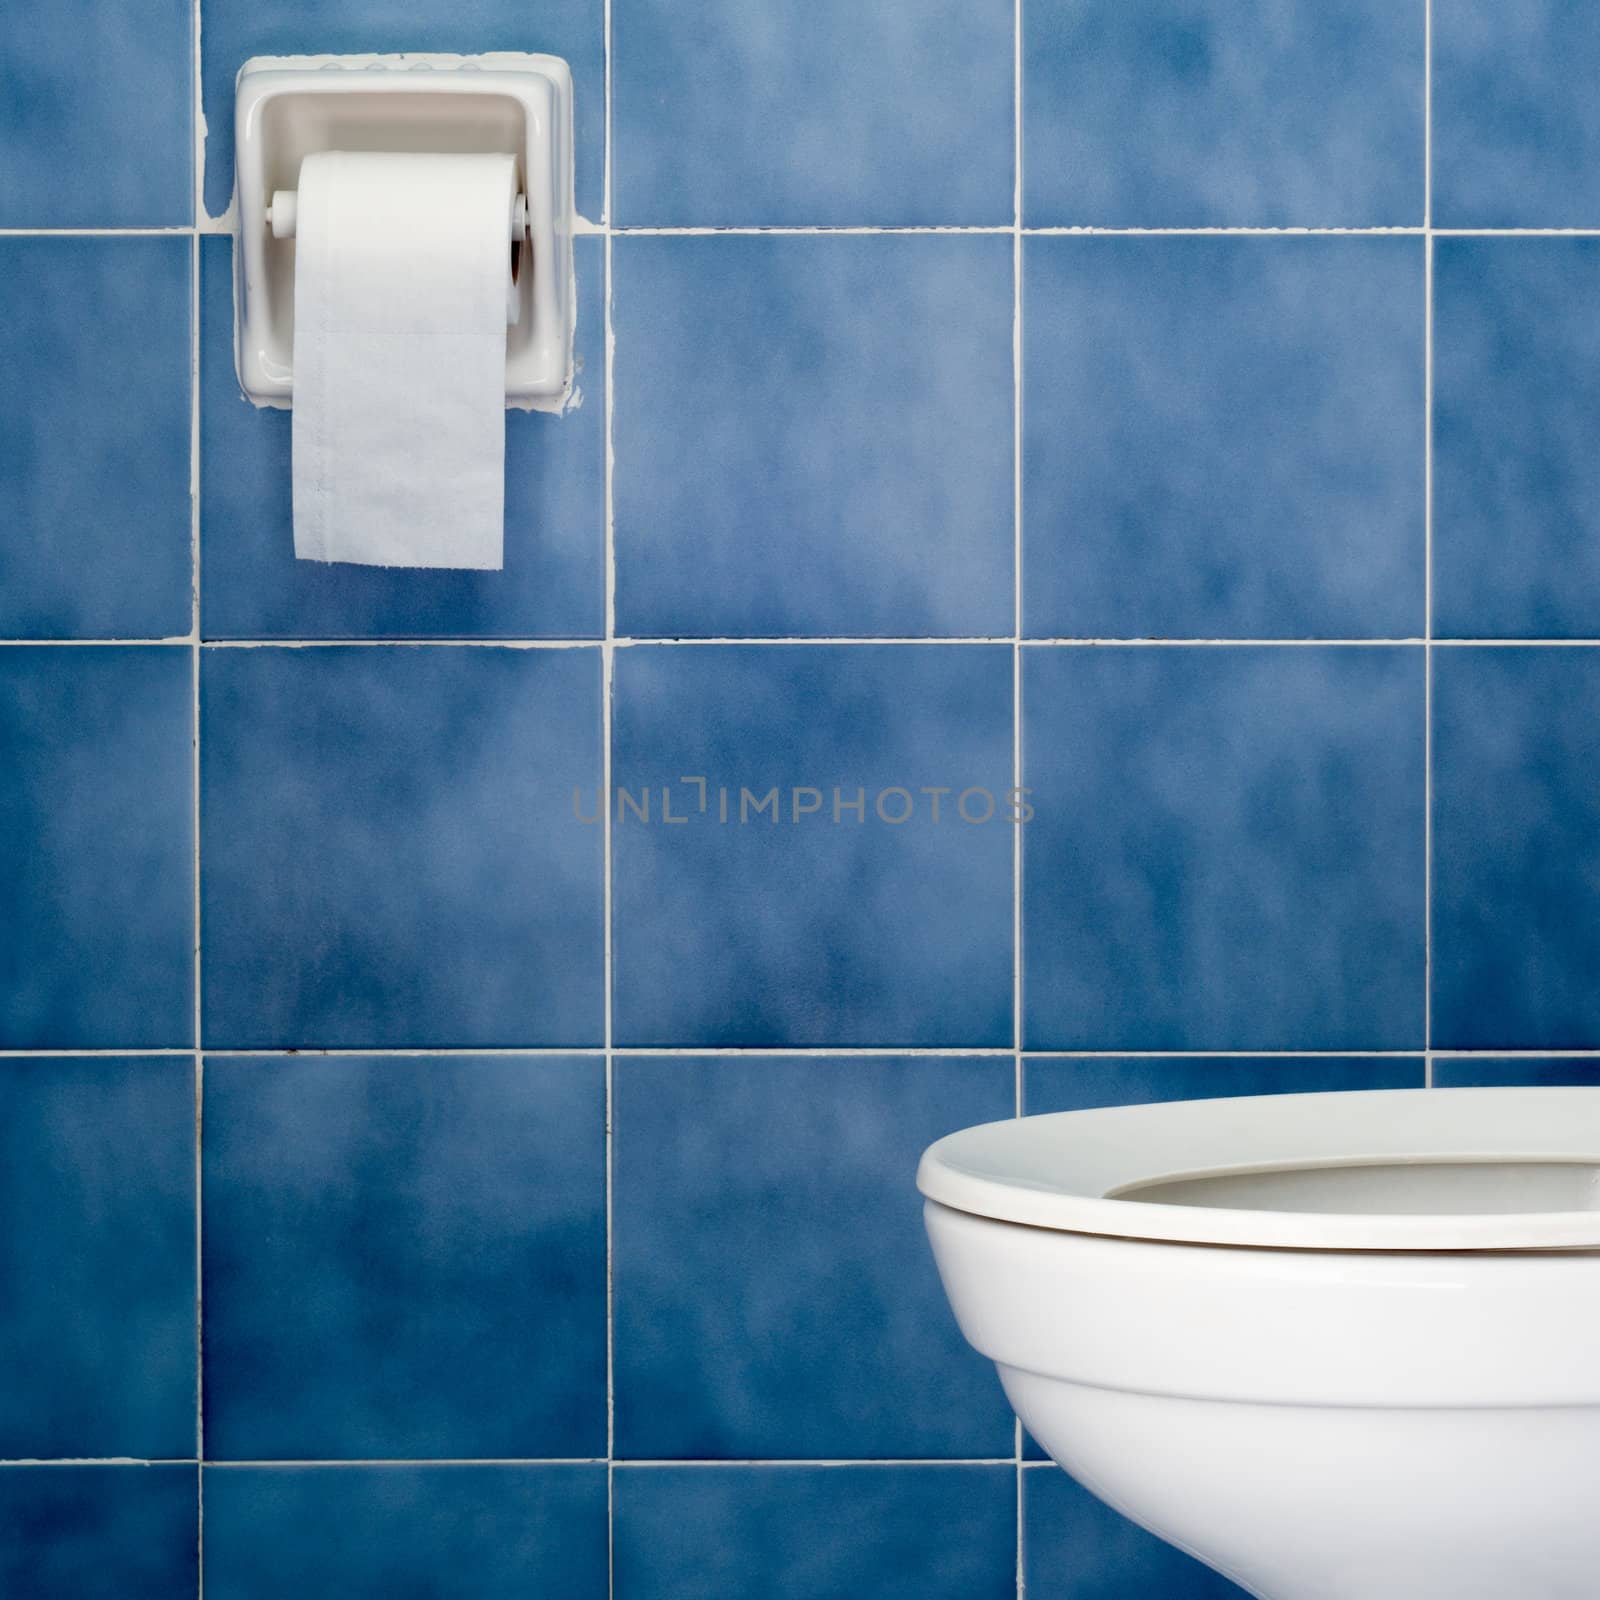 White sanitary ware and tissues by nuttakit